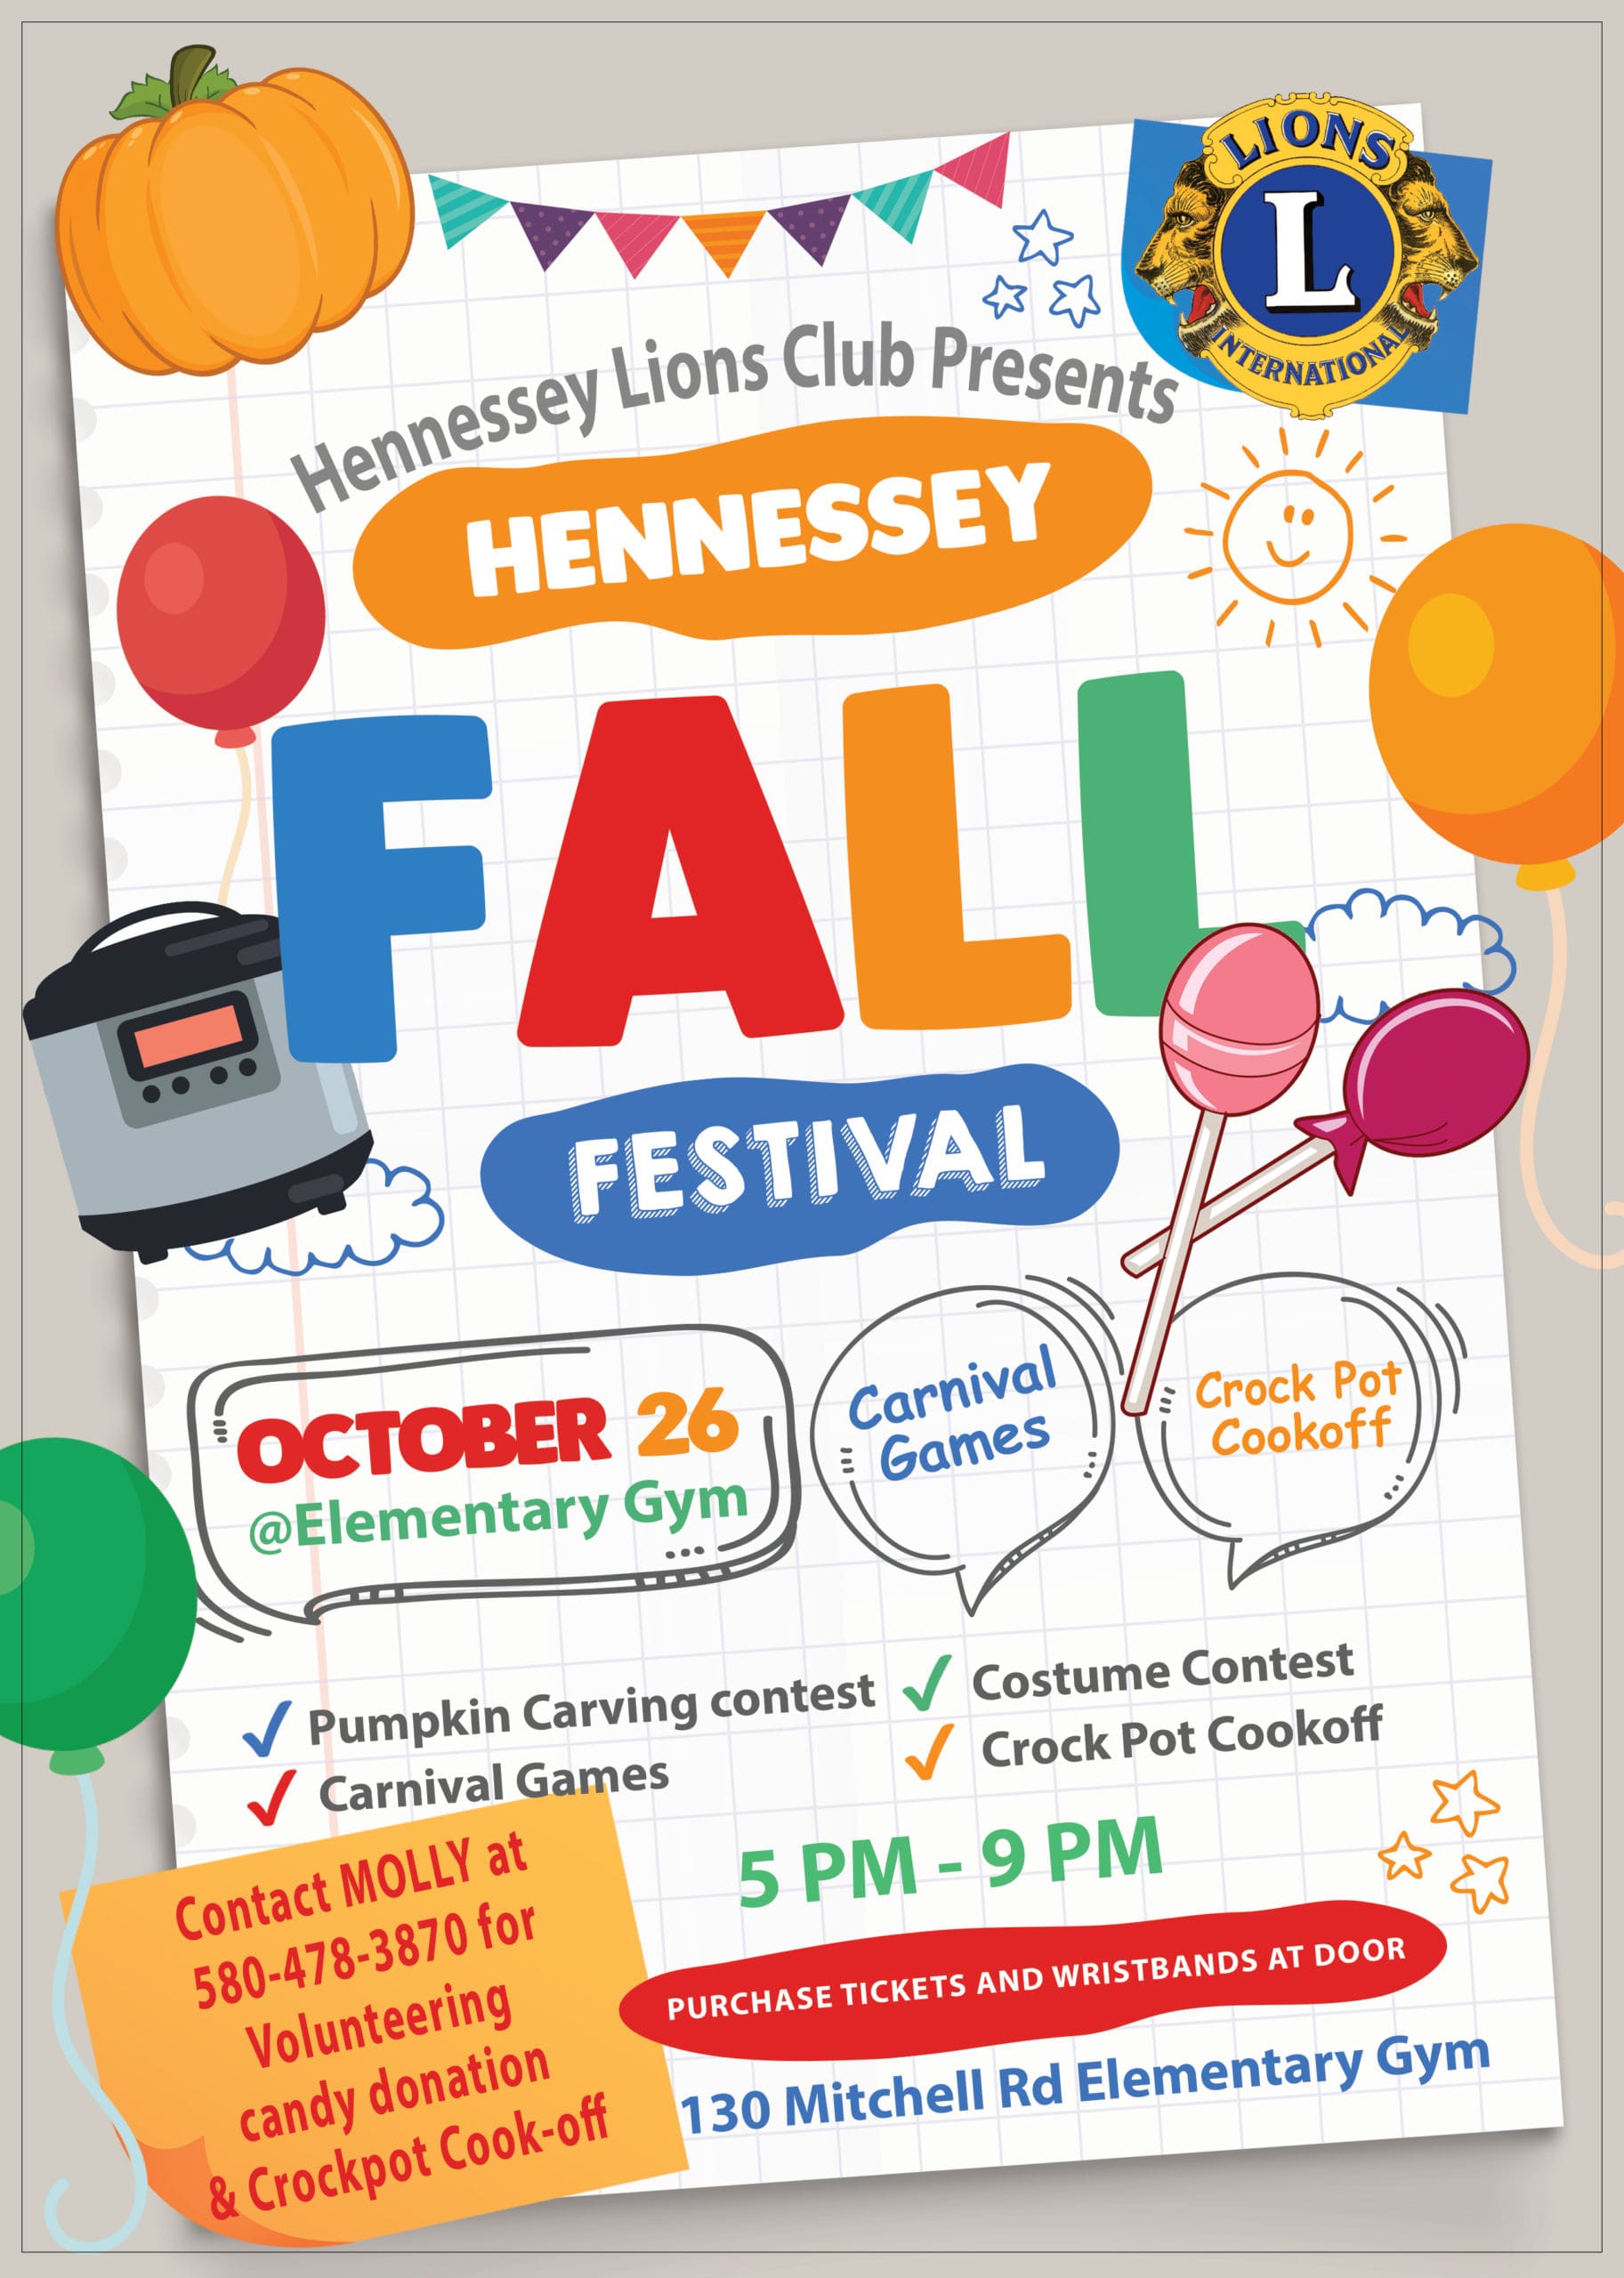 Lion’s Club FALL FESTIVAL Saturday, October 26 at the Elementary School Gym